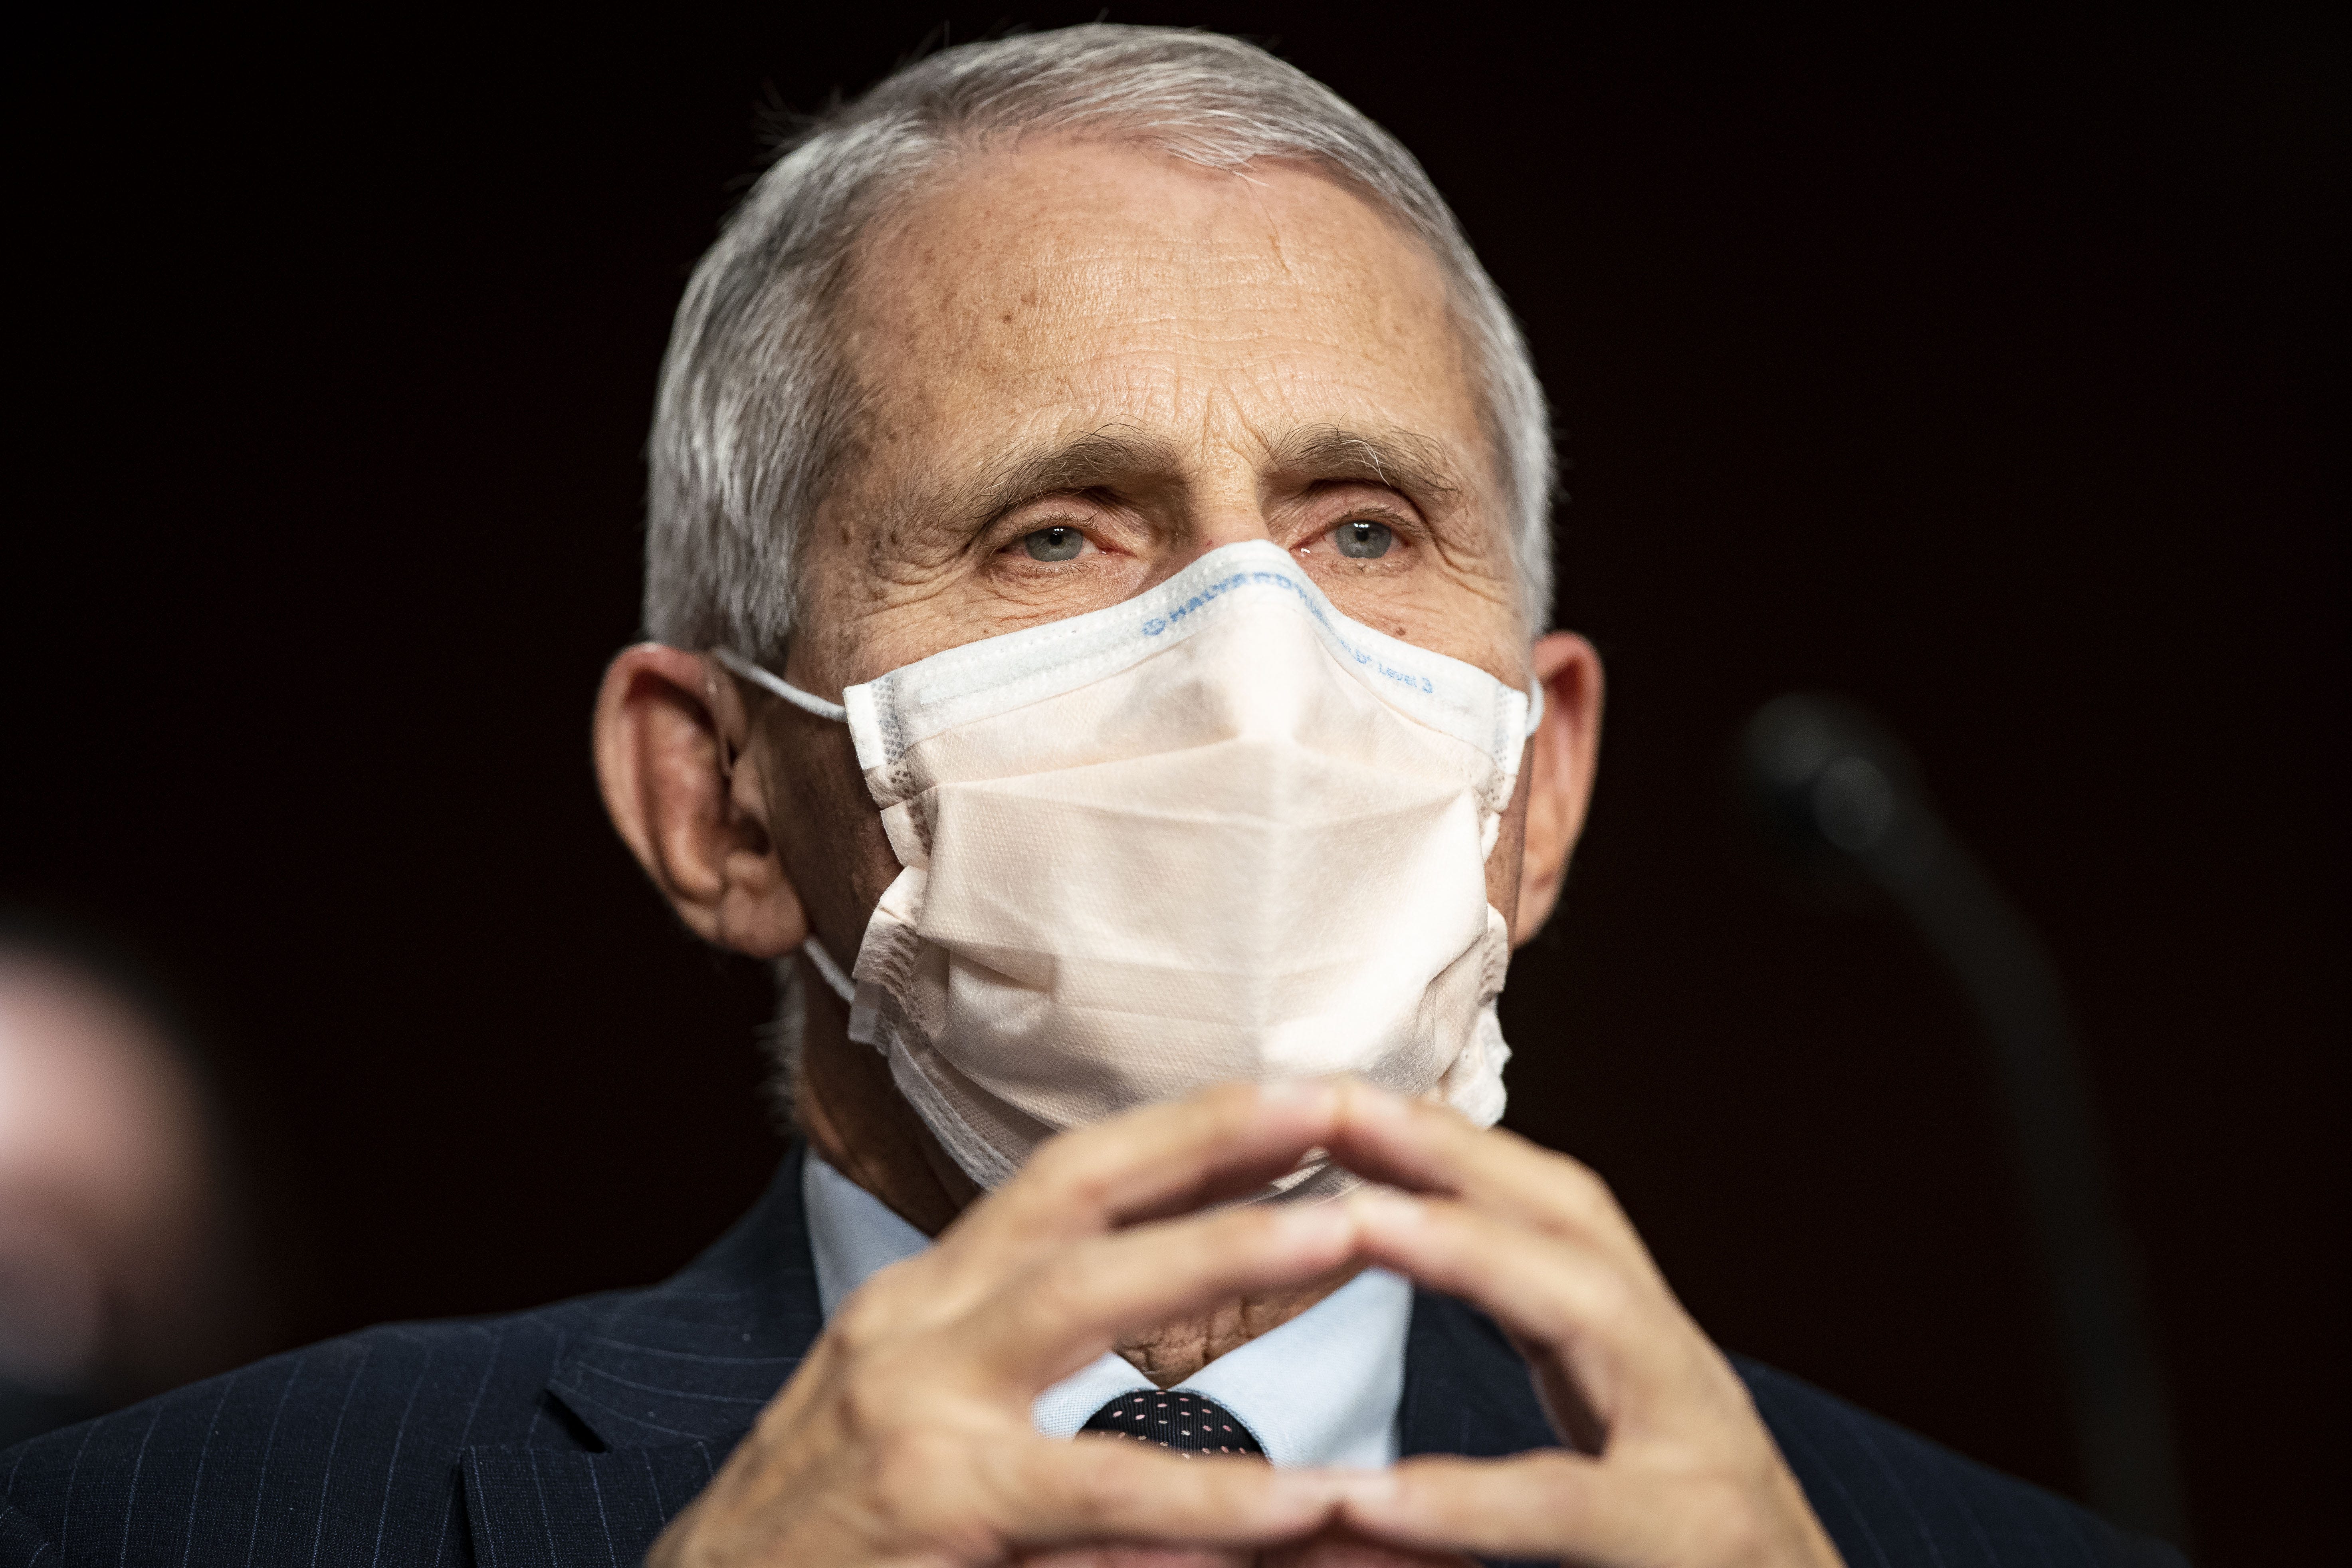 Fauci says officials feel 'very badly' about African travel ban, will reevaluate policy